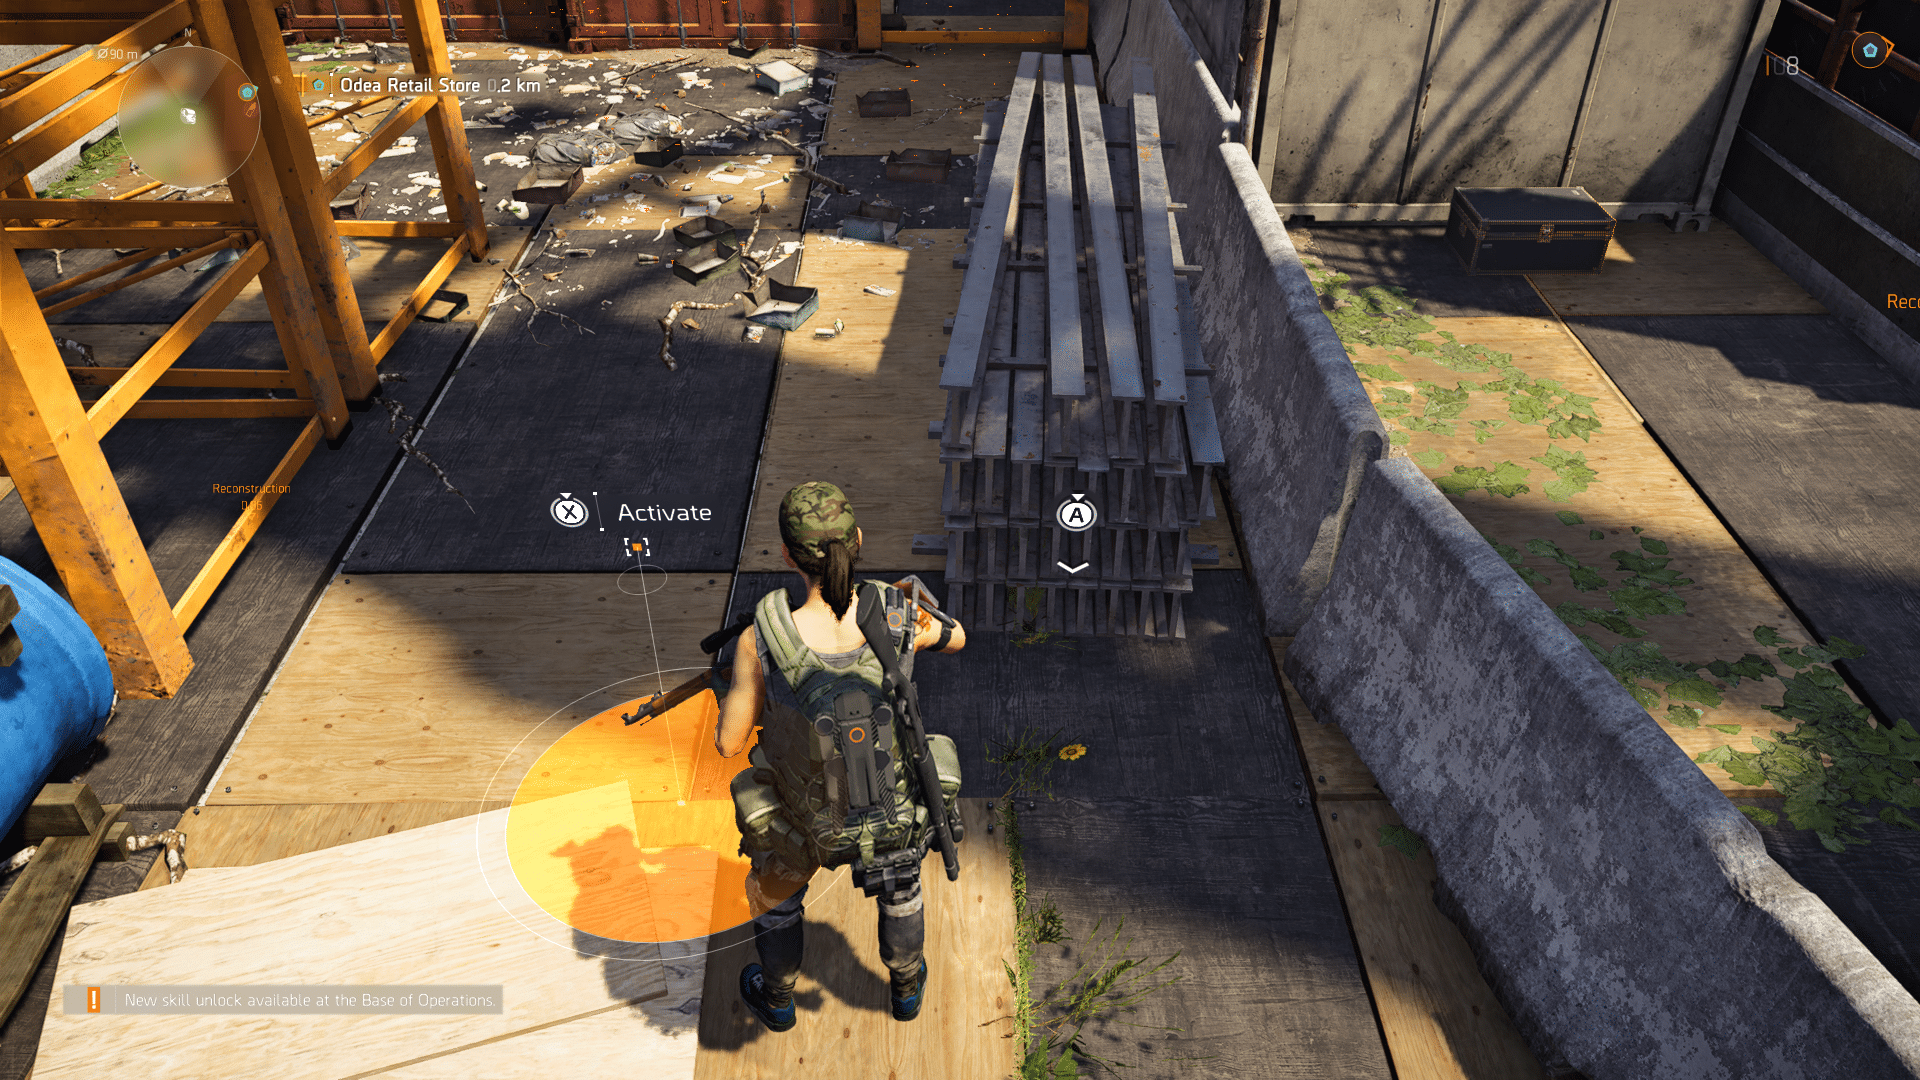 TheDivision2 3 25 2019 9 59 40 PM 471